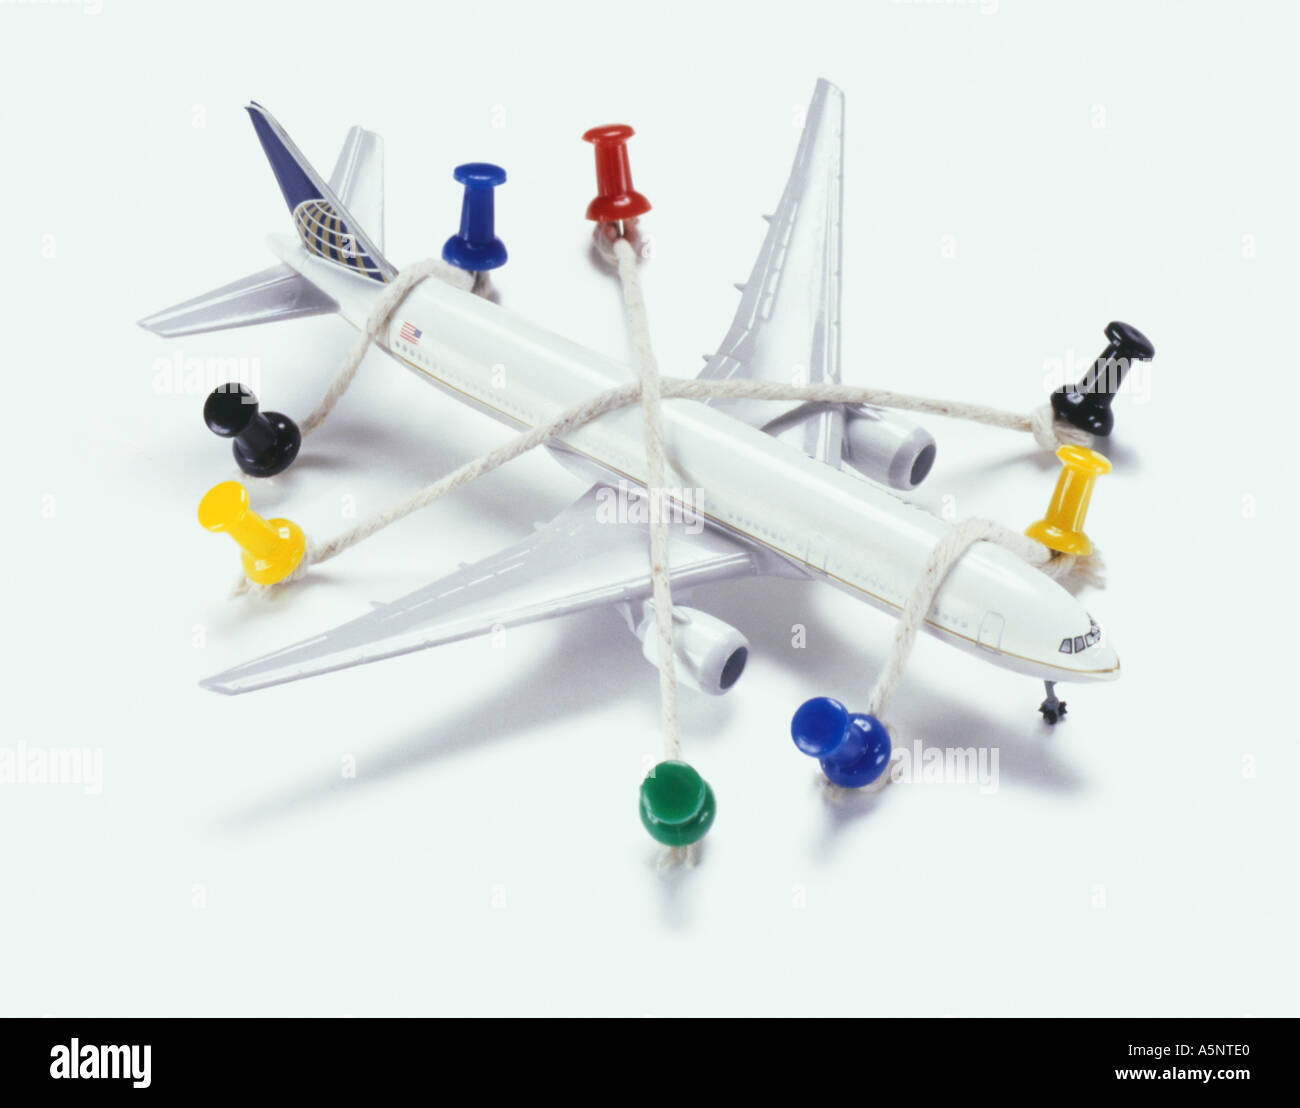 A model plane tied down with string and drawing pins Stock Photo